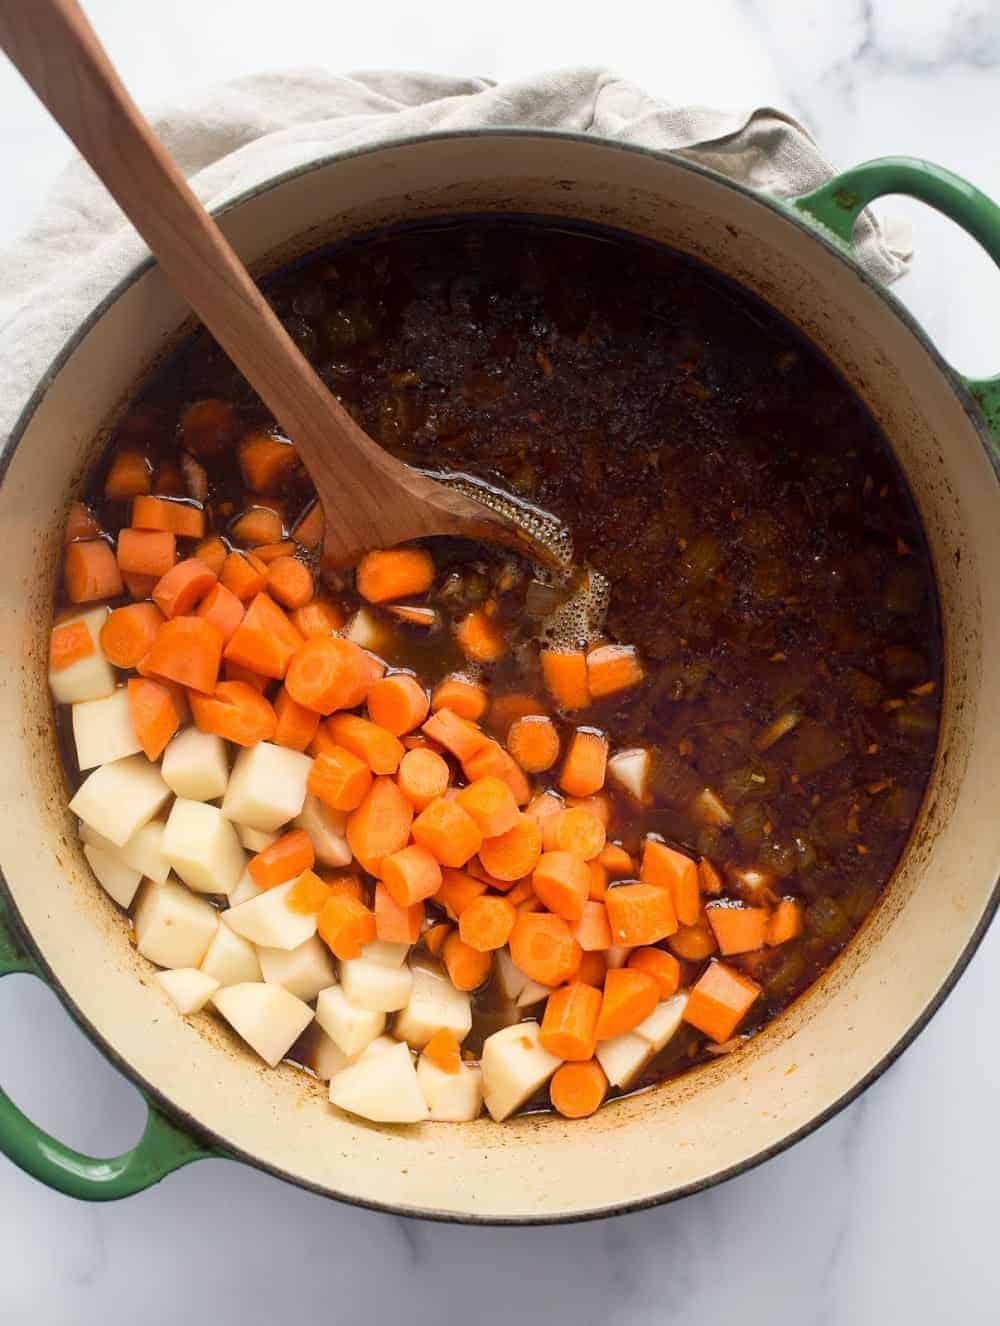 Carrots and potatoes added to Guinness stew in a Dutch oven